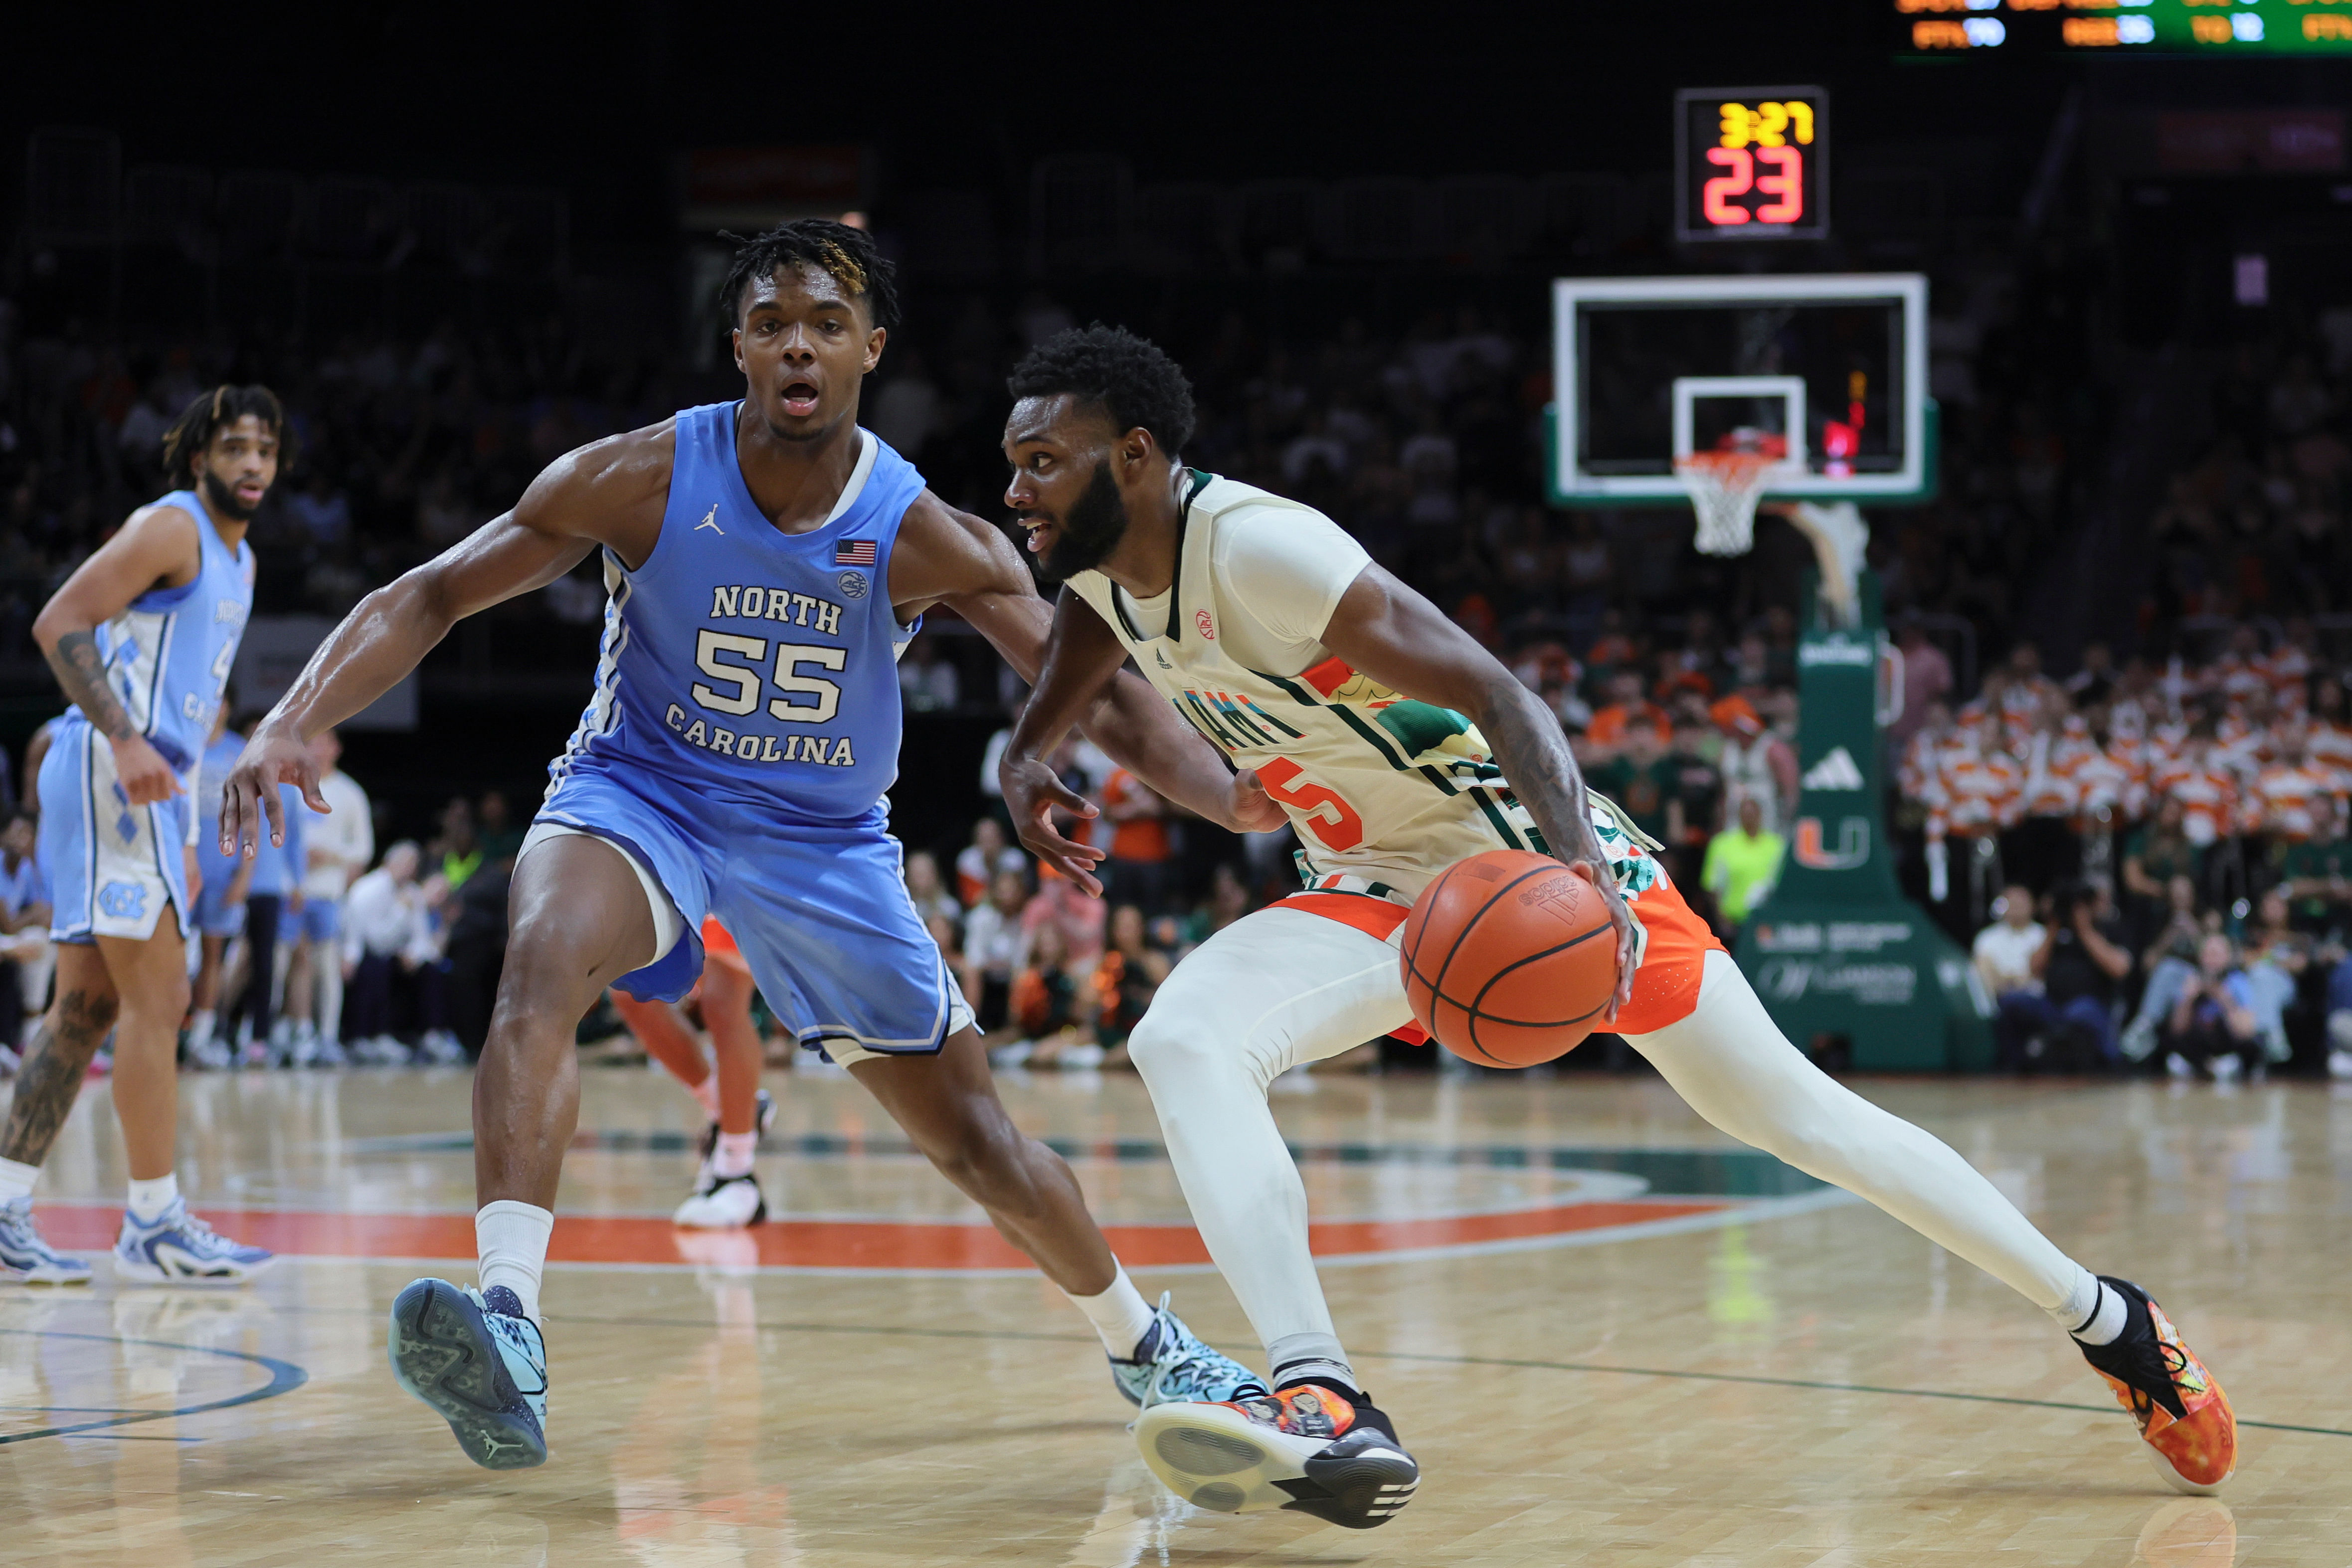 Wooga Poplar shot 38.5% from the 3-point line and averaged 13.1 ppg in the 2023-24 season for Miami.